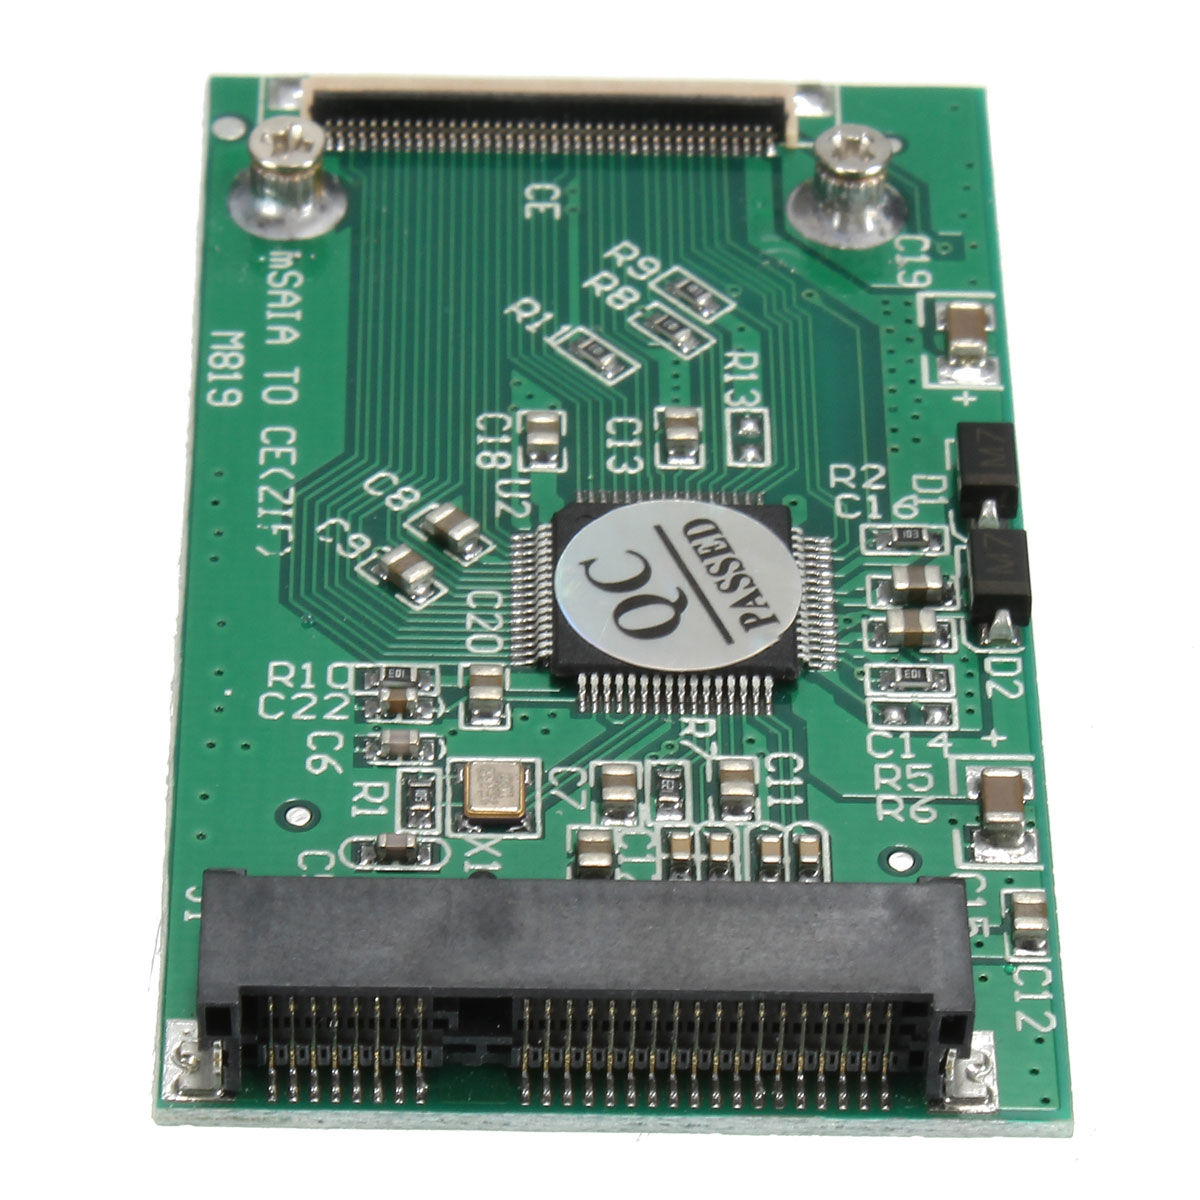 Find mSATA PCI E SSD To 40Pin ZIF CE Adapter Card Converter Card for 3 3V Mini PCI e SSD for Sale on Gipsybee.com with cryptocurrencies